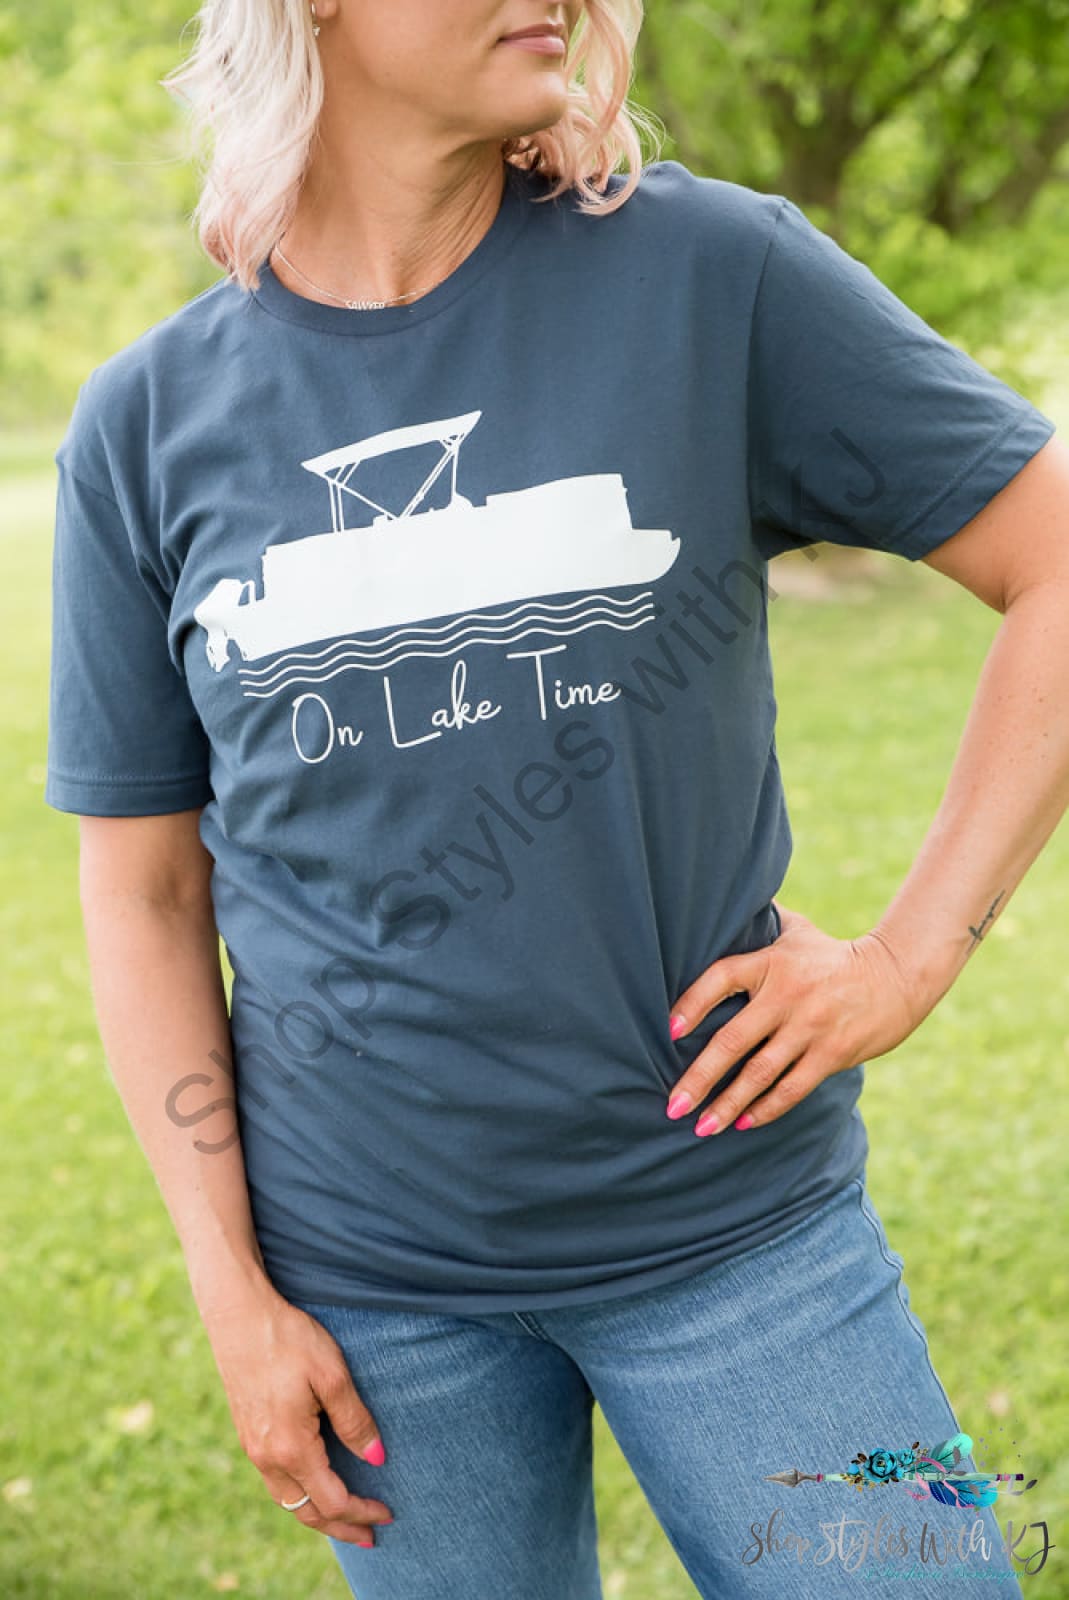 On Lake Time Graphic Tee Bt